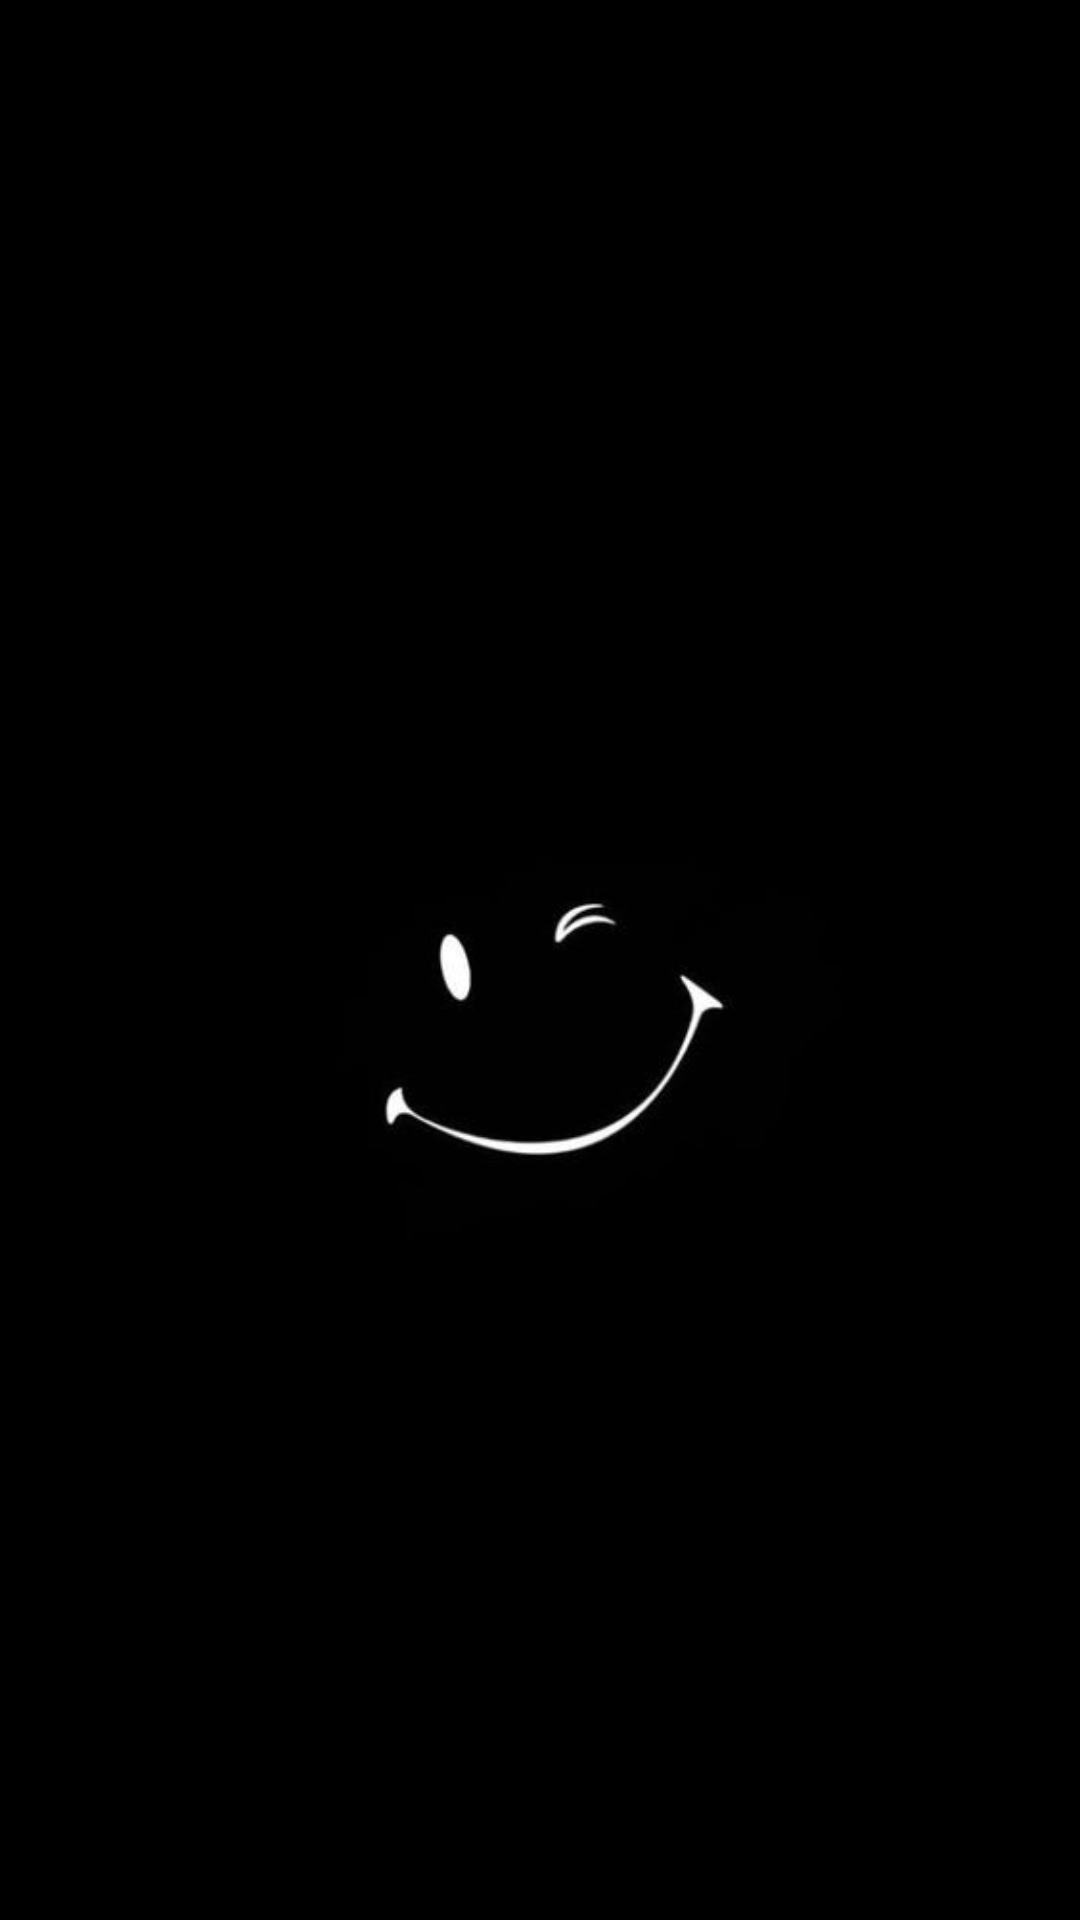 A black wall with white smiley face - Smile